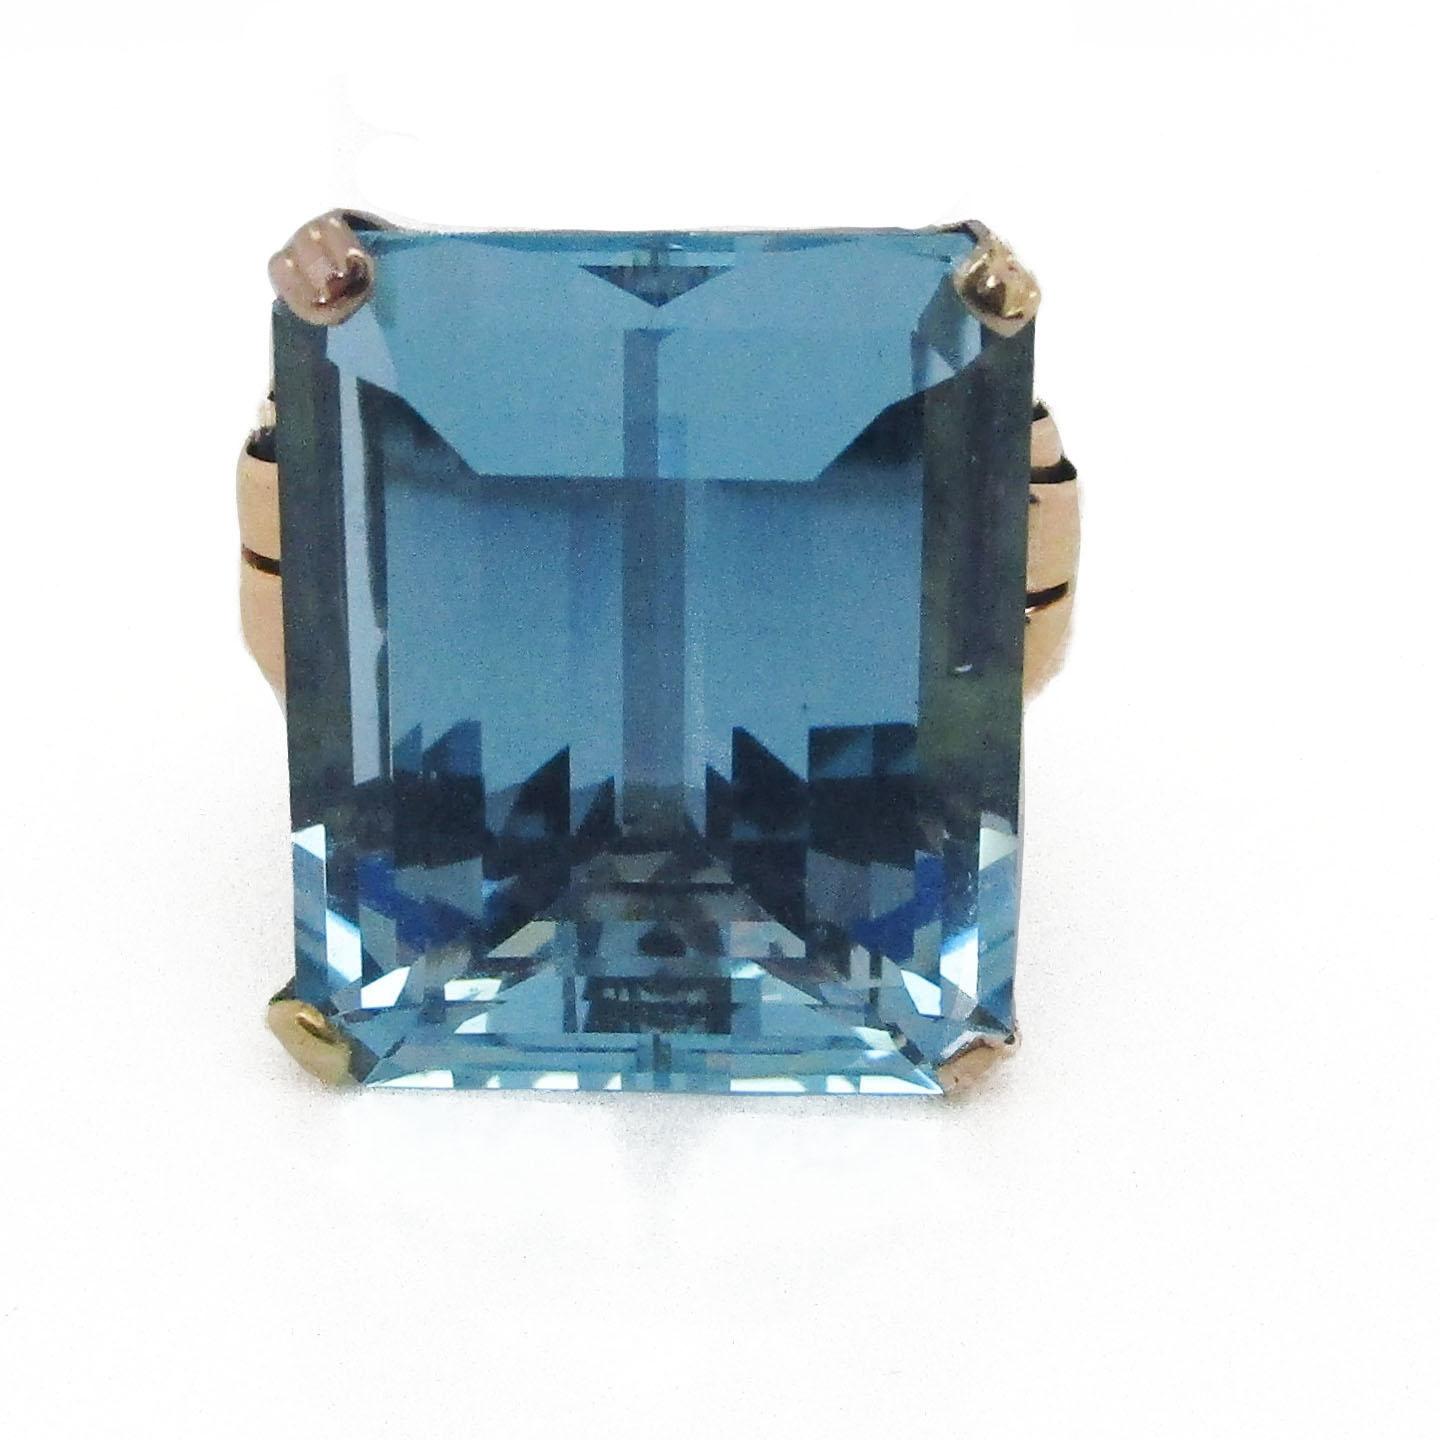 This absolute stunner of an Art Deco ring is from 1935 and features a killer combination of 18k rose gold and a knockout 28 + carat aquamarine center! The stone has gorgeous soft blue hues and an enchanting element of dimensionality which means you